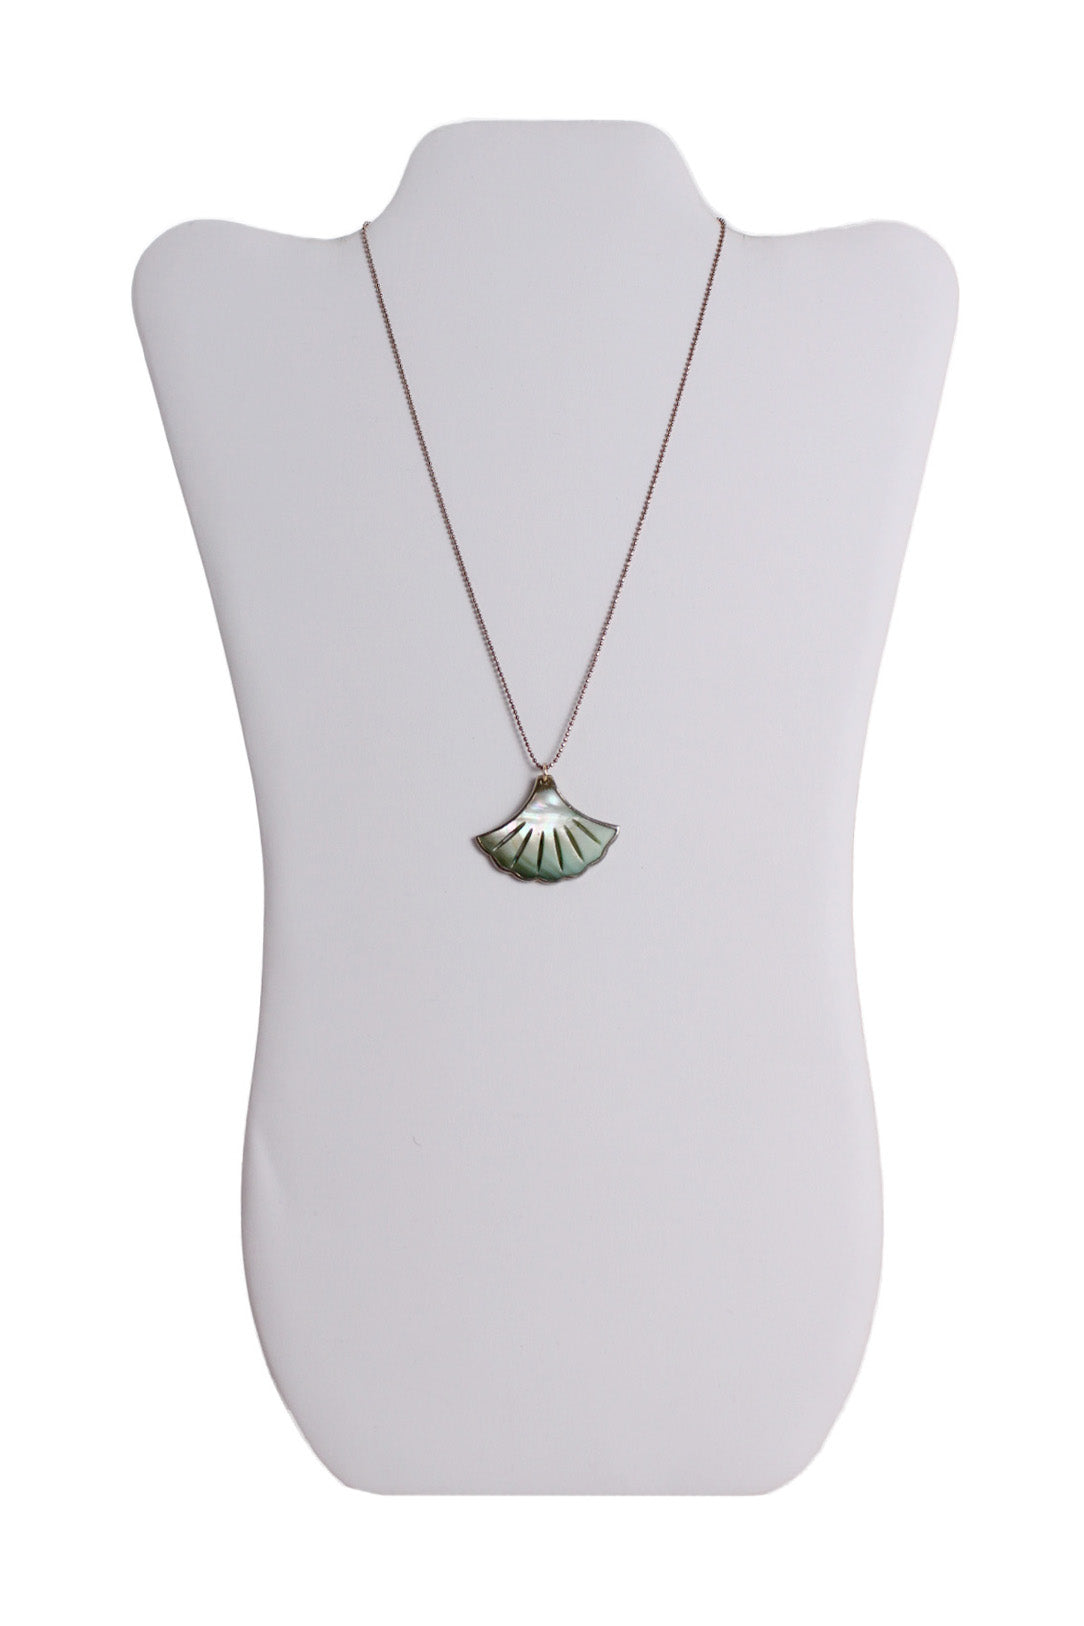 miniature ball chain necklace with aqua shell pendant against necklace stand